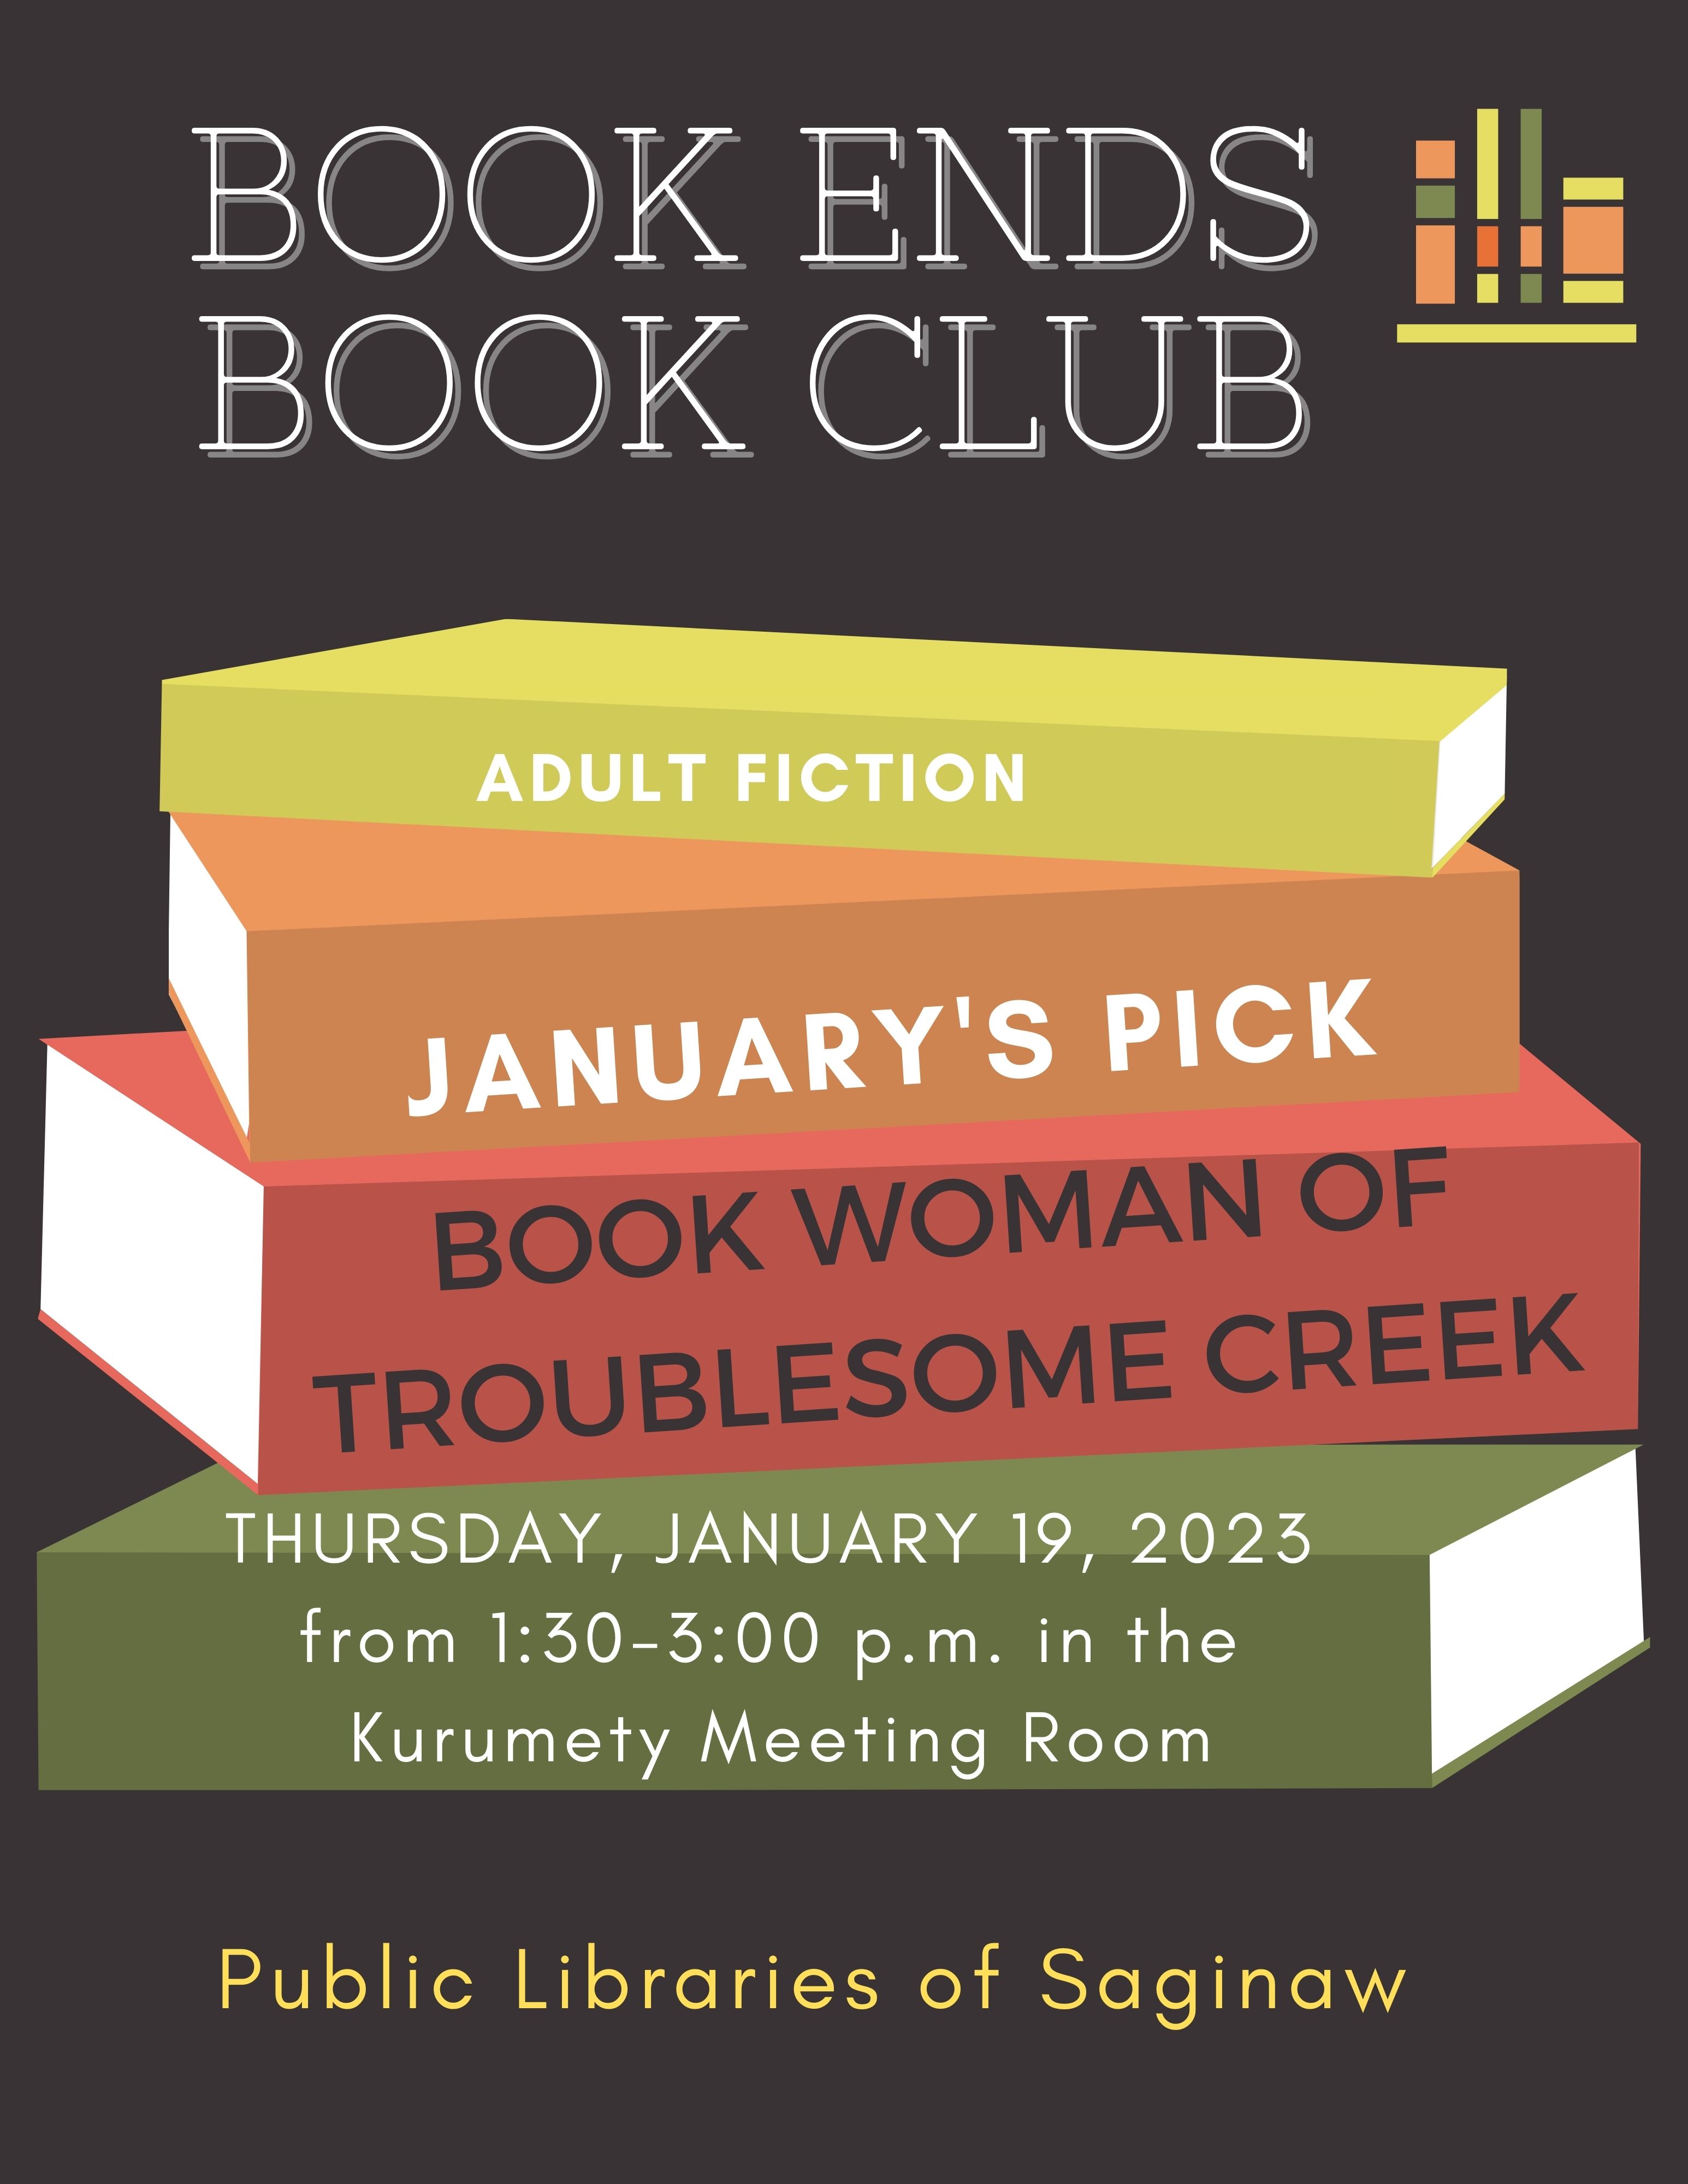 January's Pick: The Book Woman of Troublesome Creek